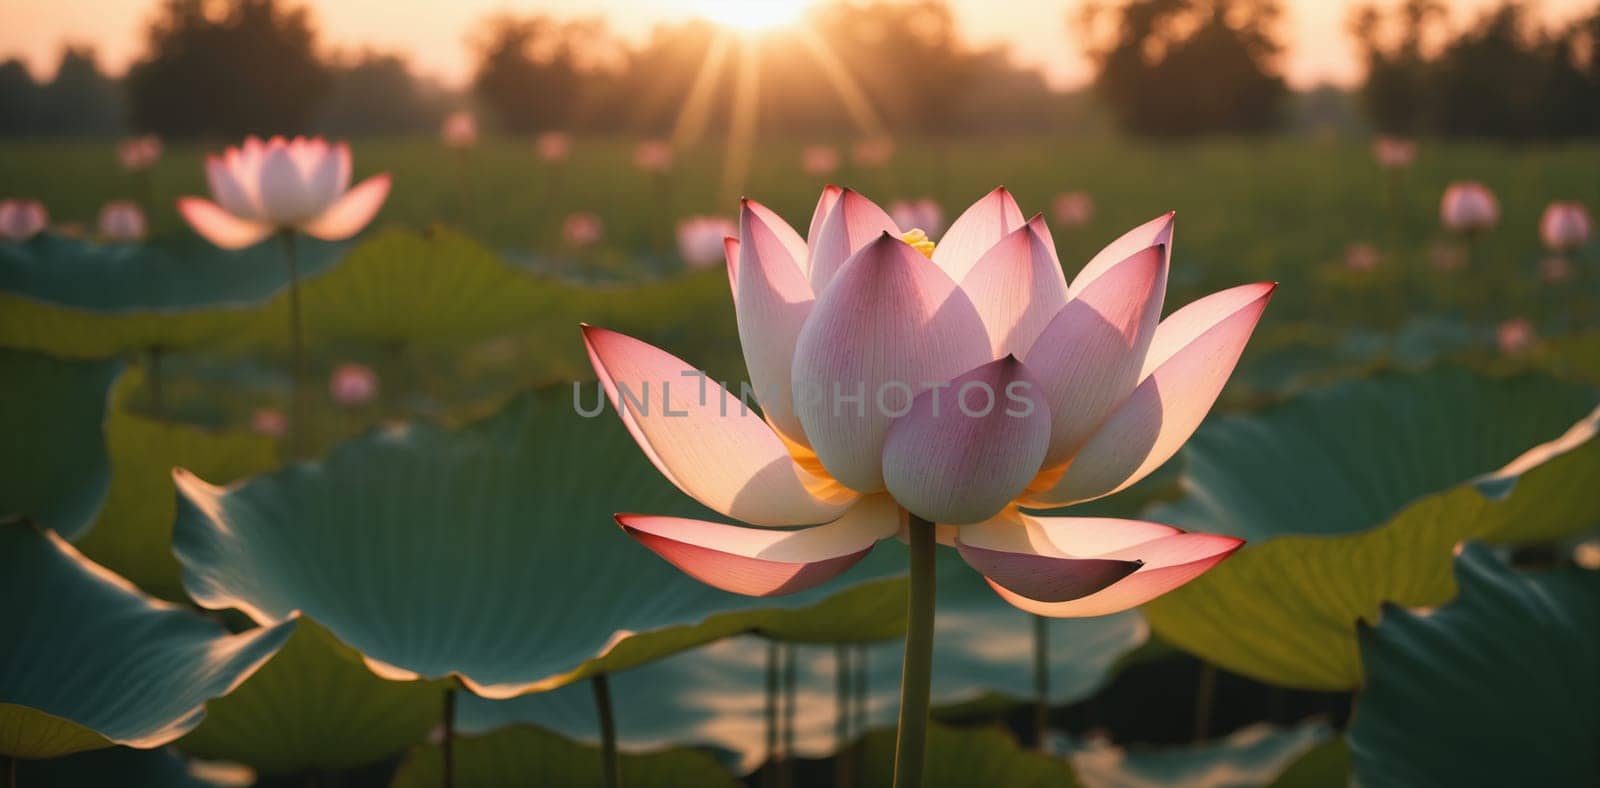 Lotus flower blooming in the pond at sunset, Thailand. by Andre1ns